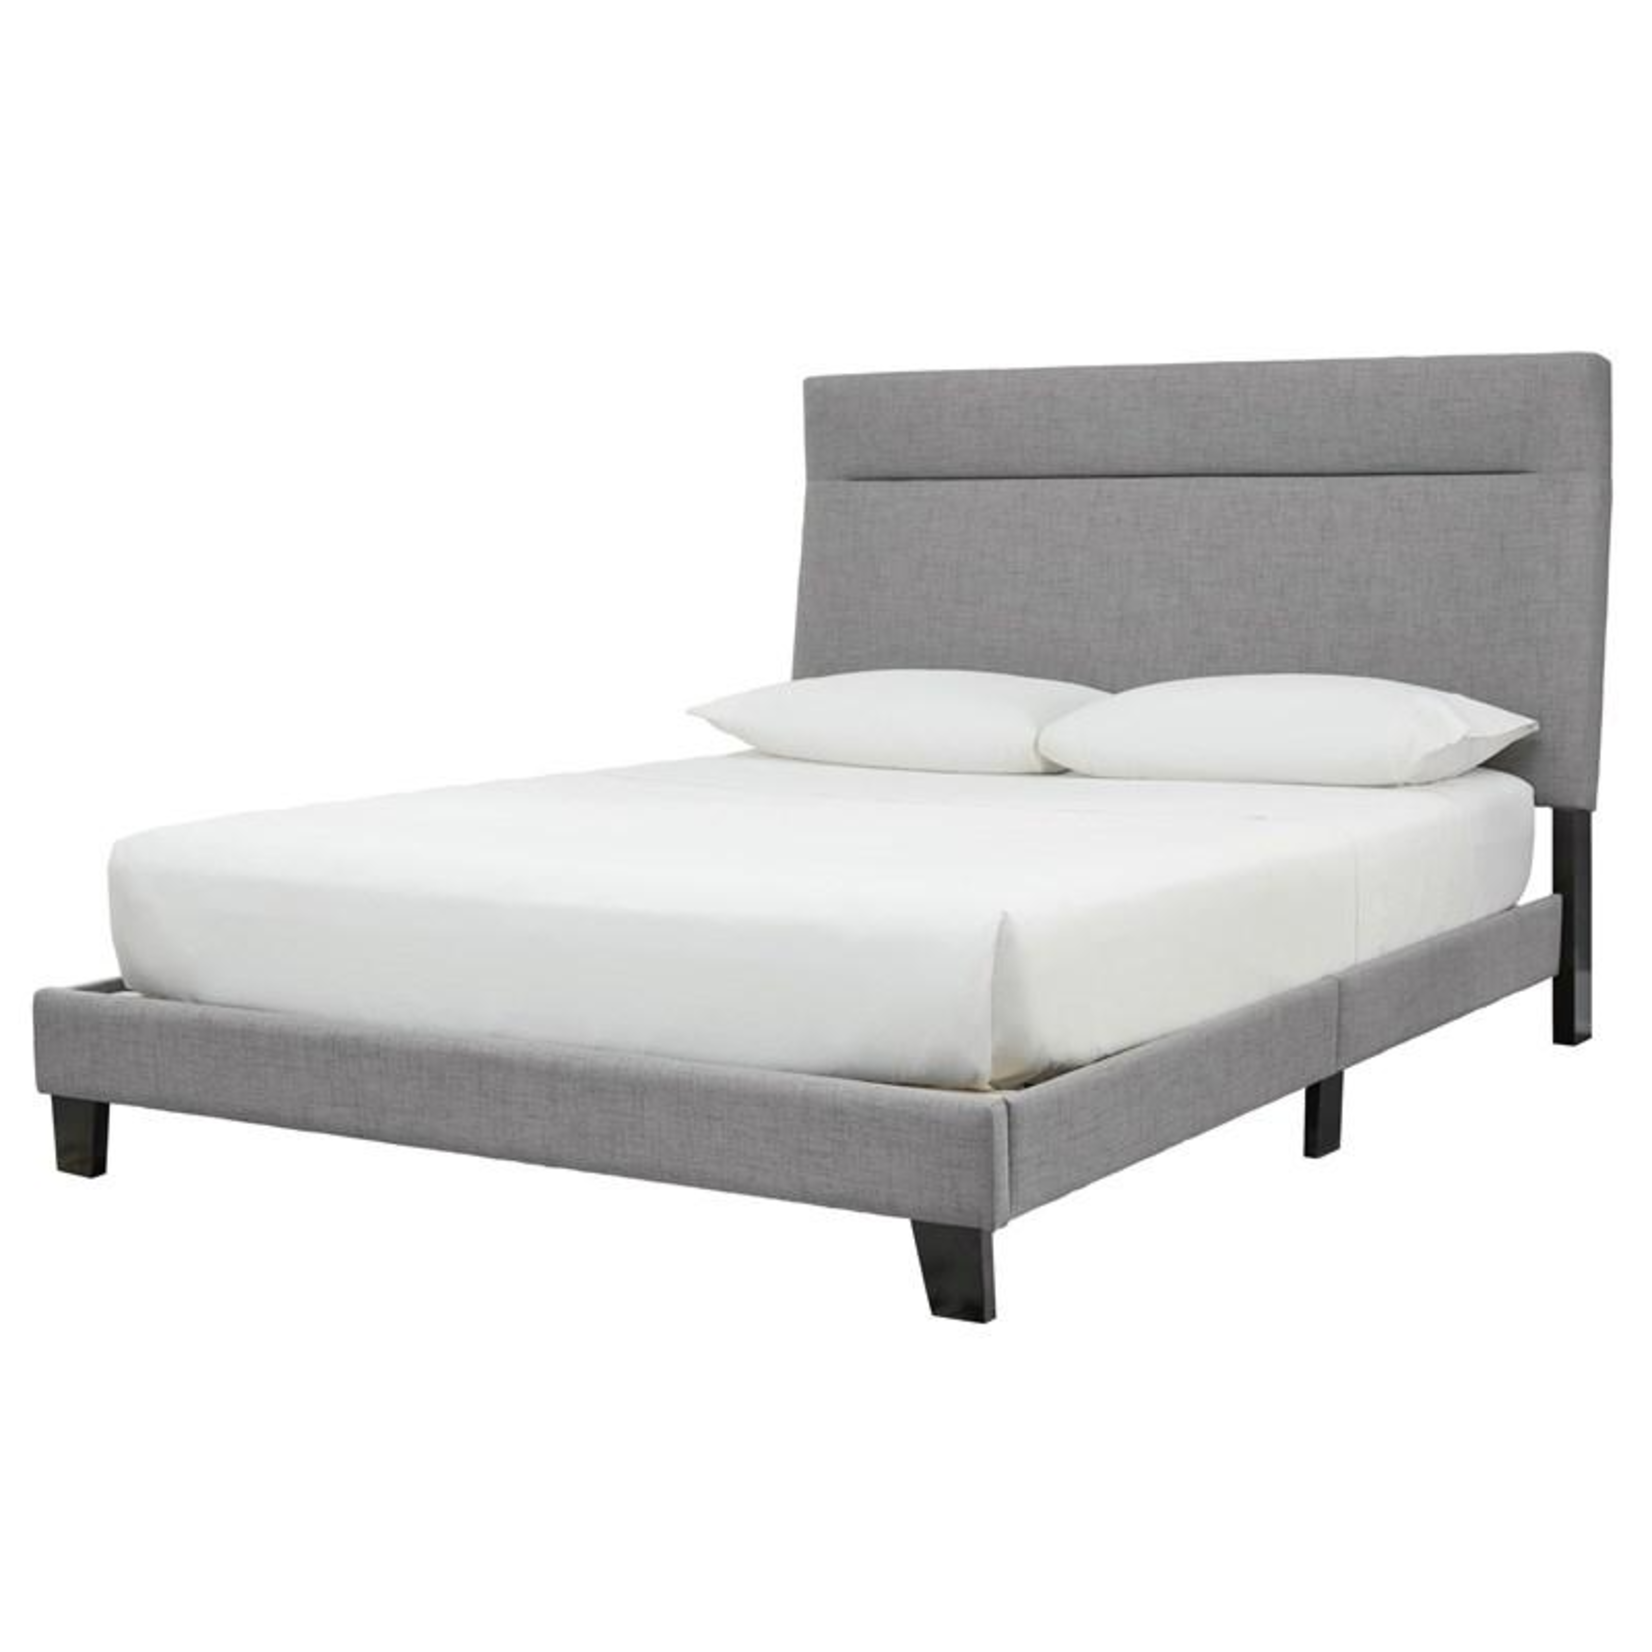 Signature by Design Ashley Adelloni Queen Upholstered Platform Bed